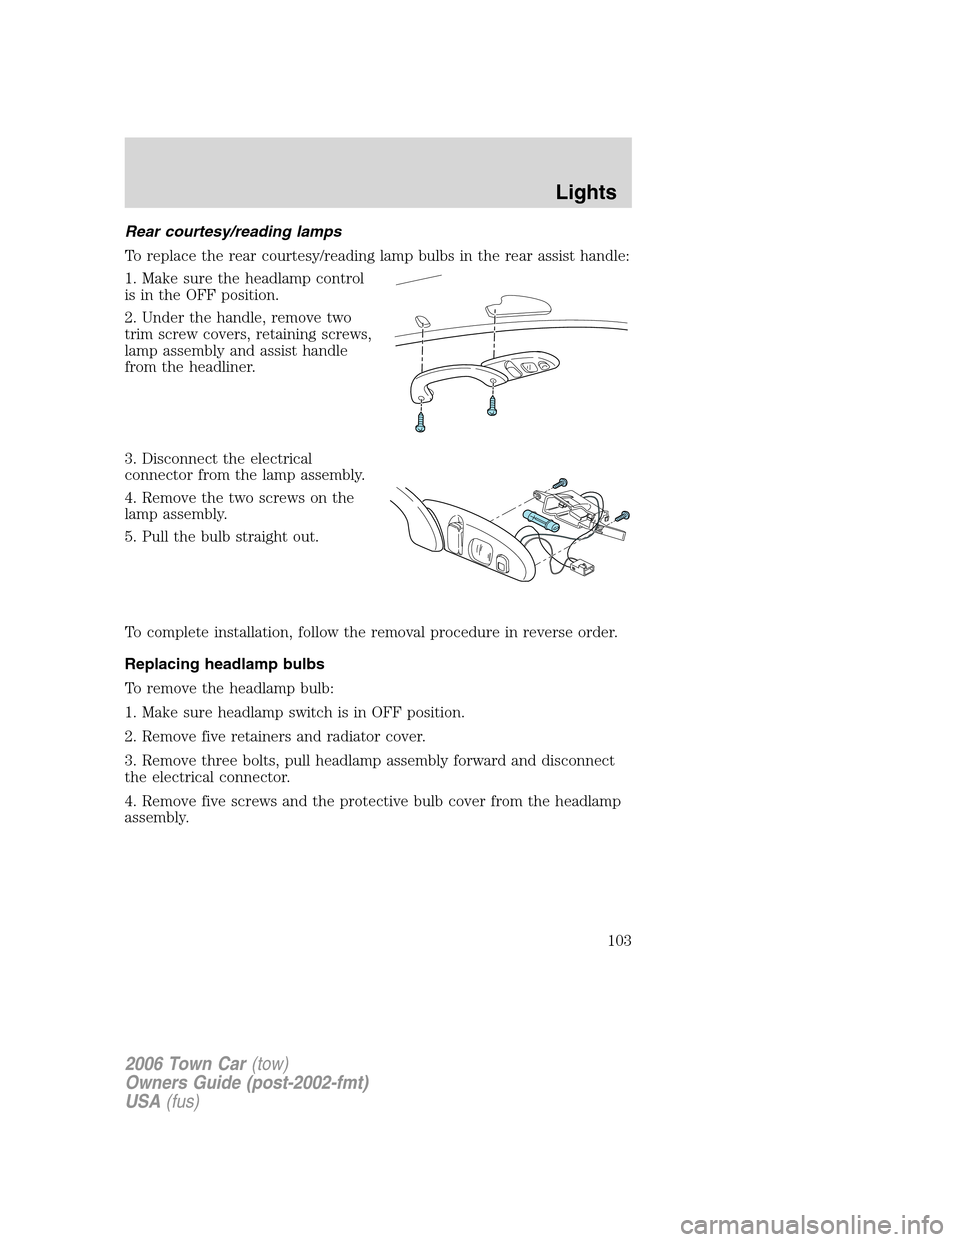 LINCOLN TOWN CAR 2006  Owners Manual Rear courtesy/reading lamps
To replace the rear courtesy/reading lamp bulbs in the rear assist handle:
1. Make sure the headlamp control
is in the OFF position.
2. Under the handle, remove two
trim sc